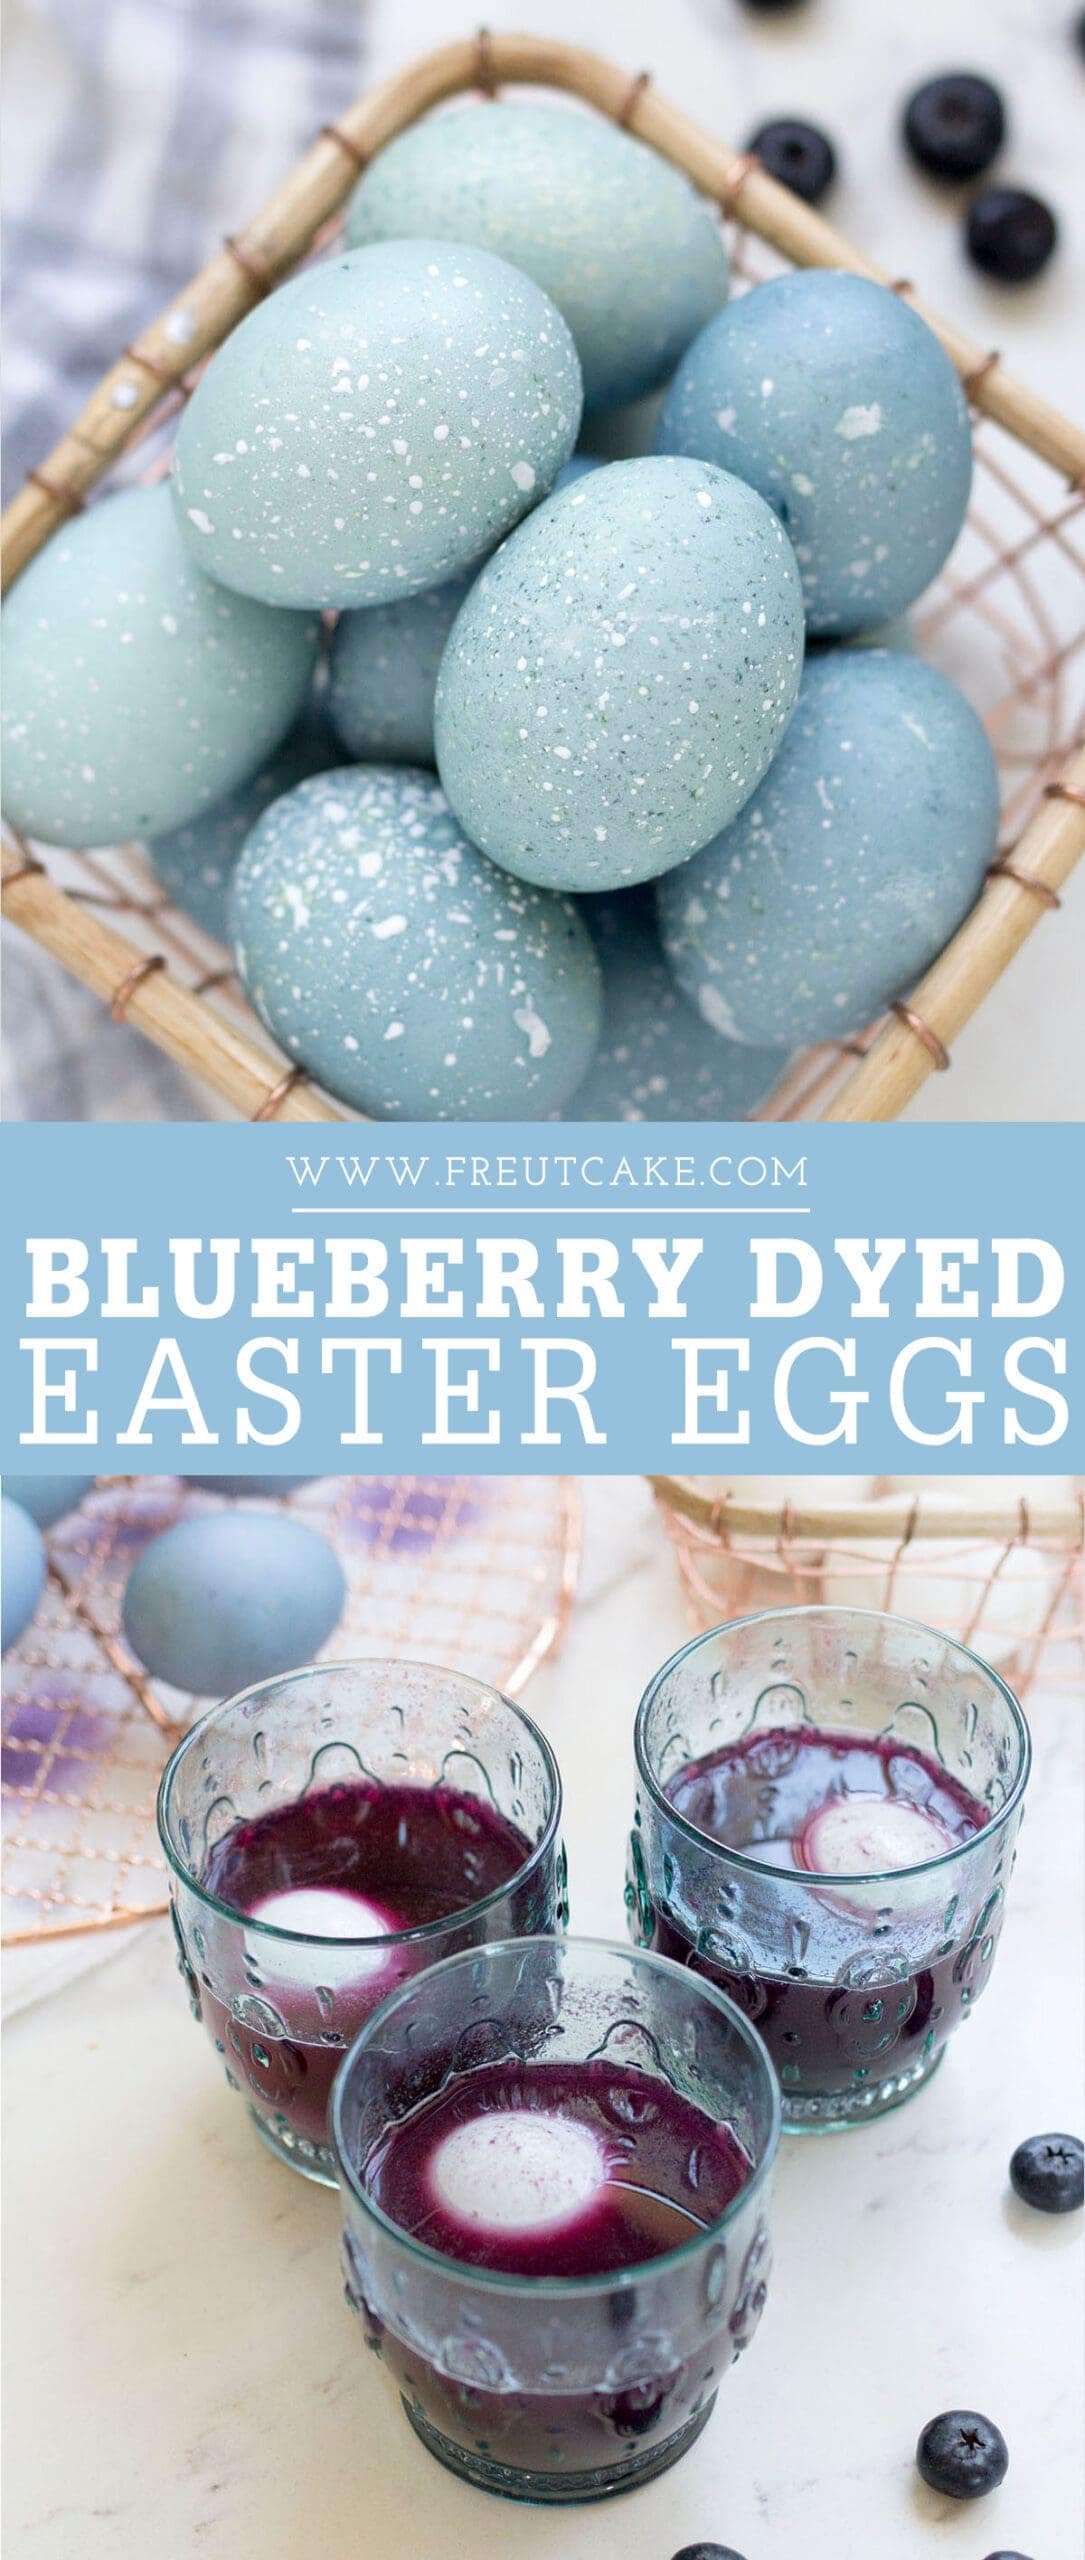 Blueberry Dyed Easter Eggs